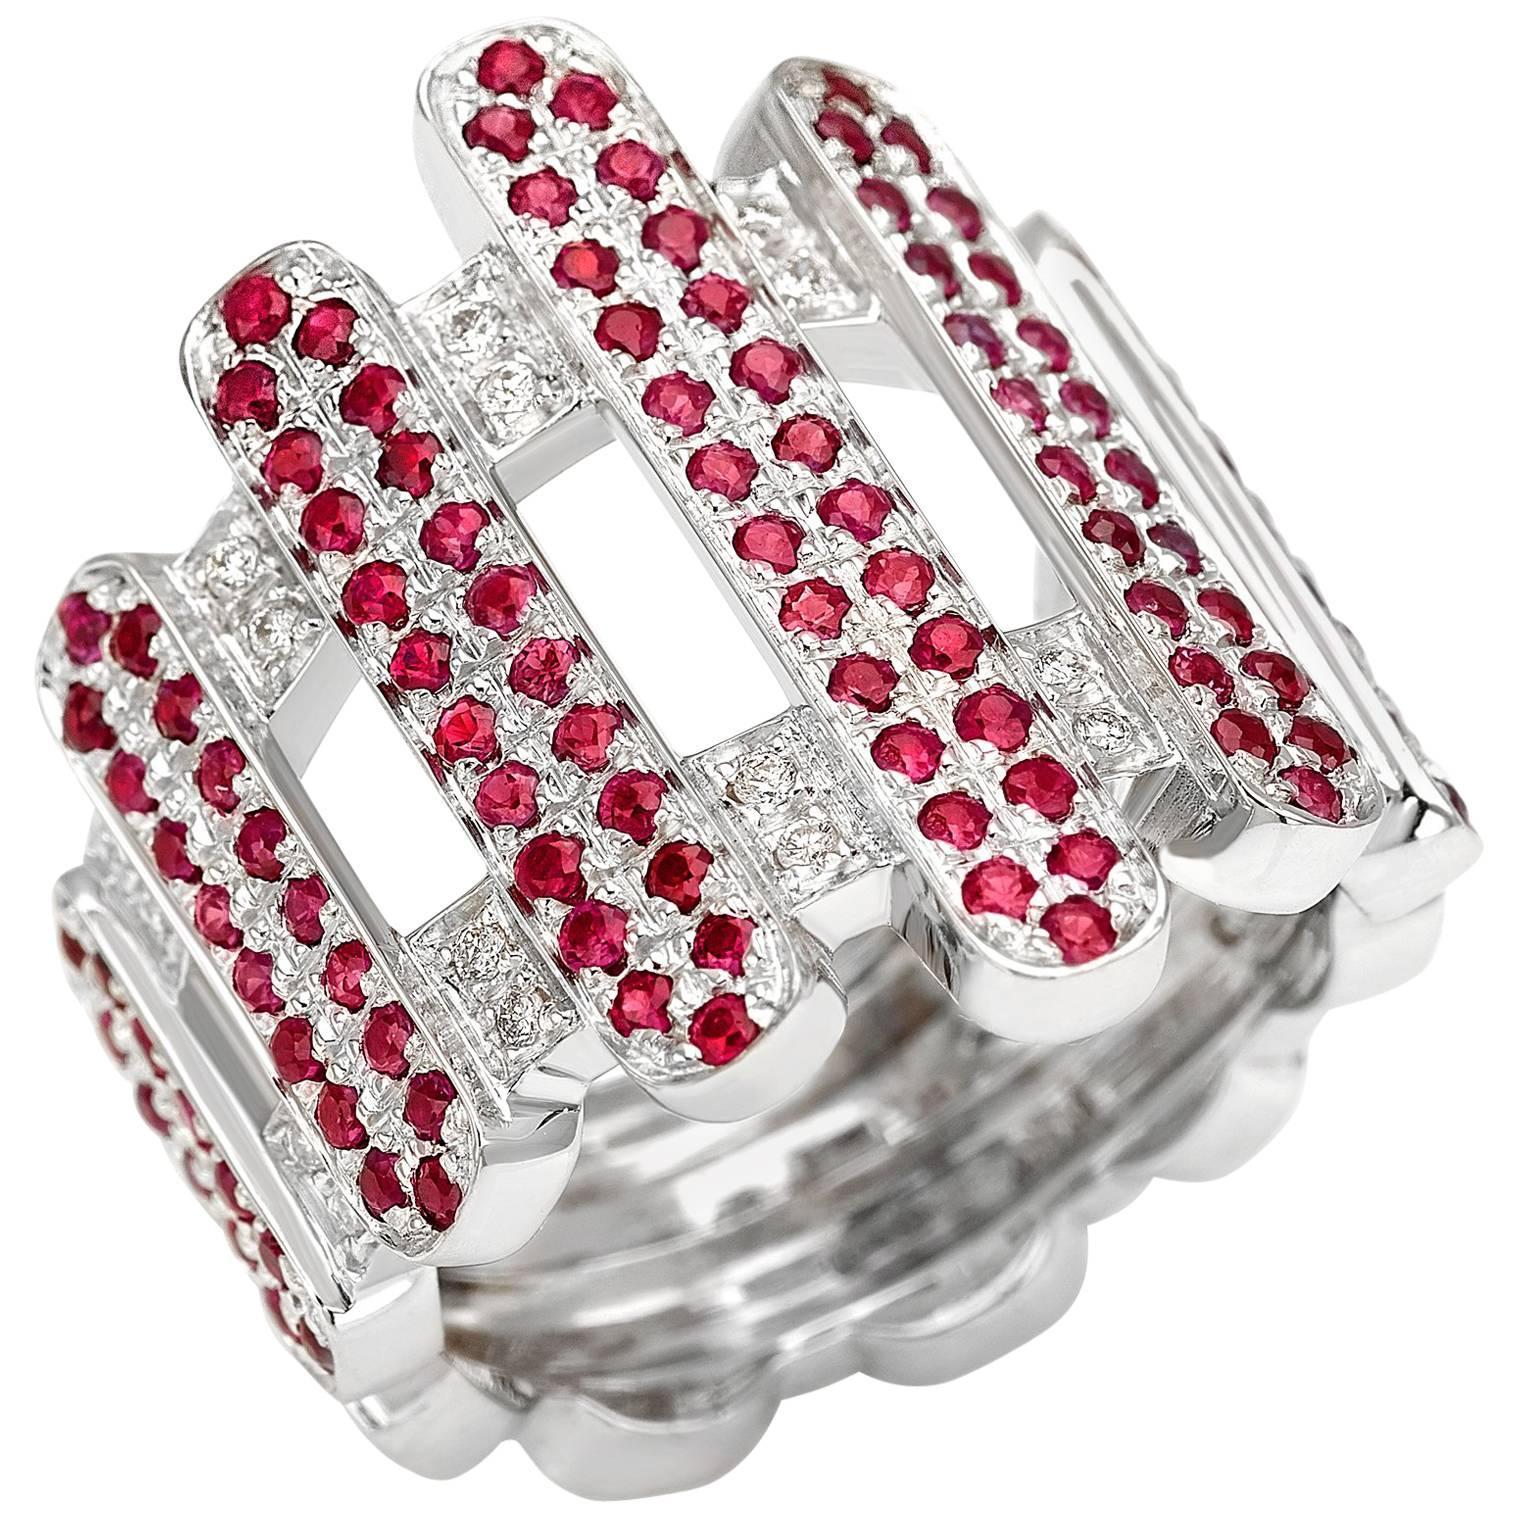 Ring from the Collection "Moonlight" 18 Karat White Gold Ruby and White Diamonds